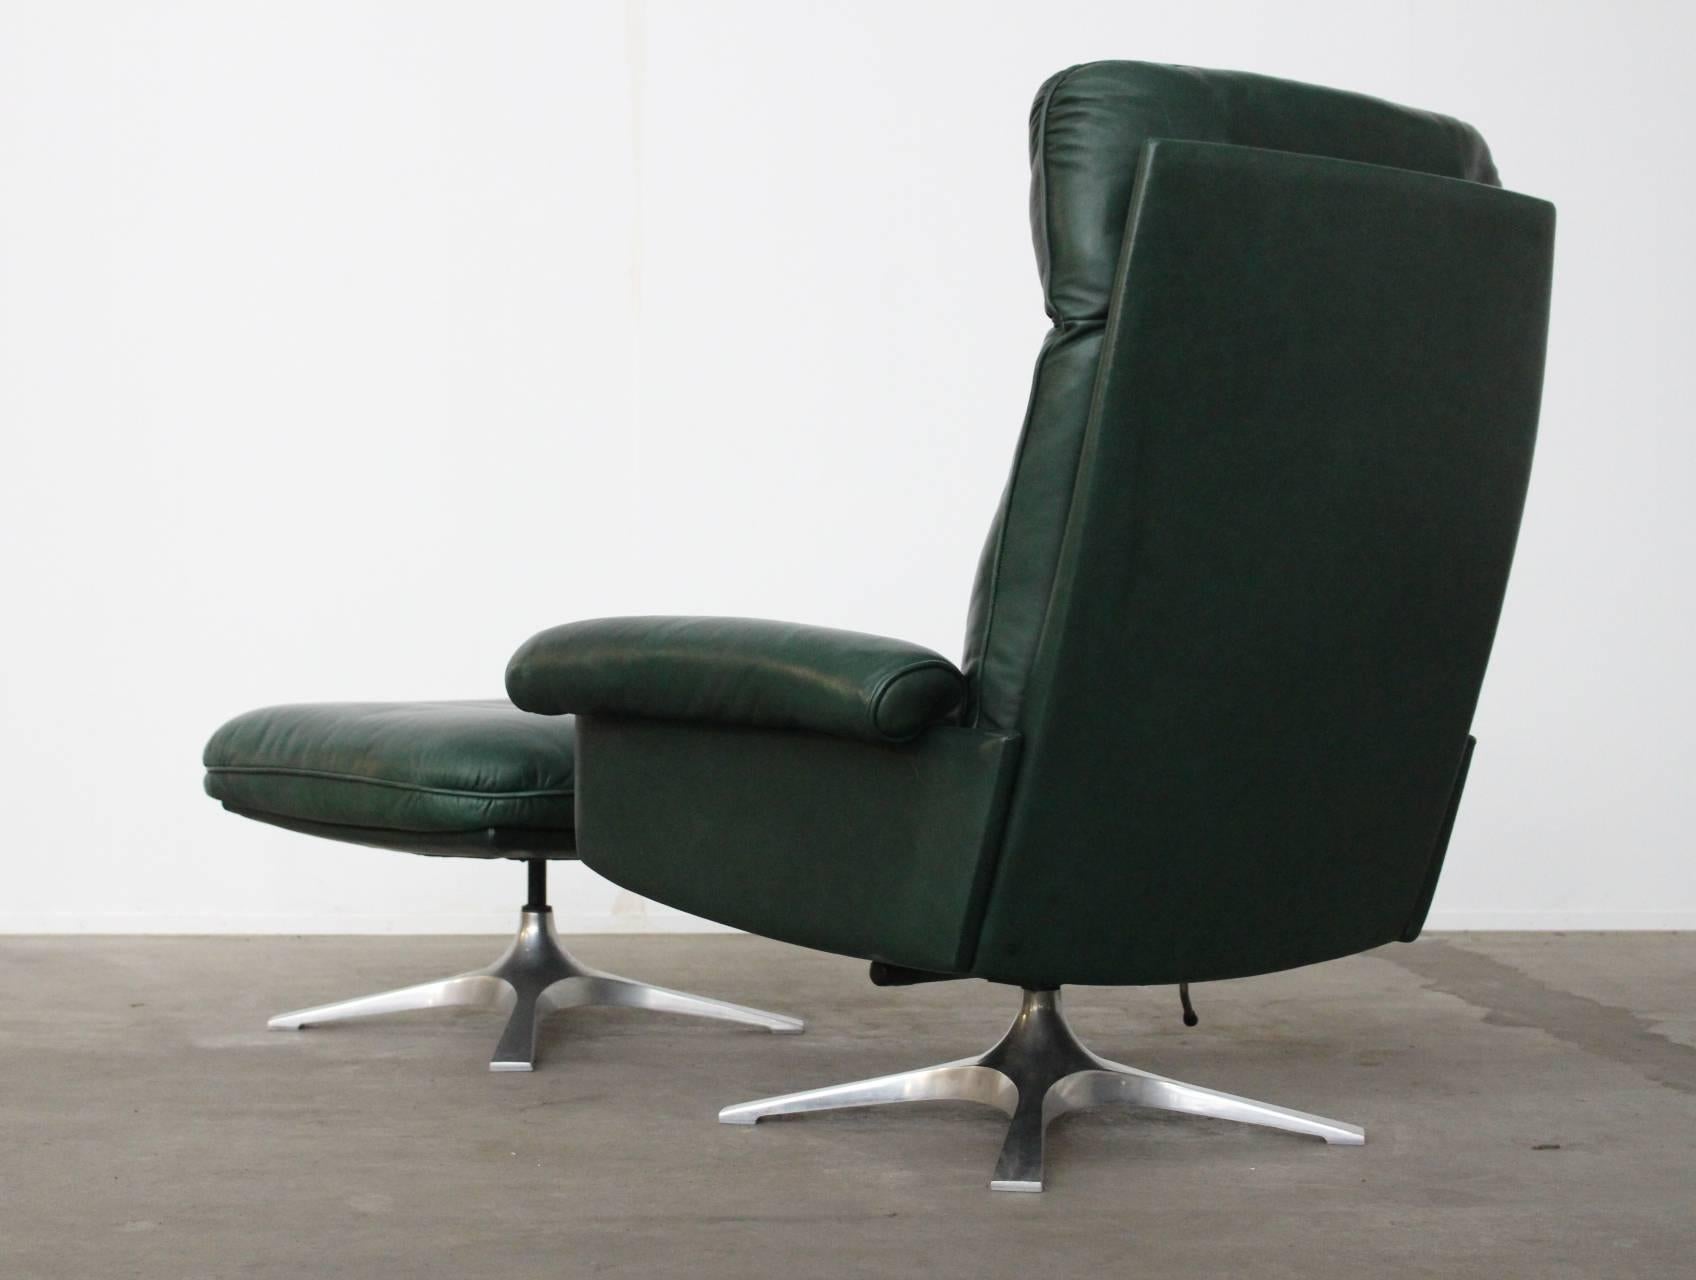 Beautiful highest quality green leather upholstered lounge chair of model DS31 by De Sede, Switzerland with its matching swiveling hocker/ footstool.
This is the model with the beautiful polished aluminum four-leg tulip base with stabilizers at the